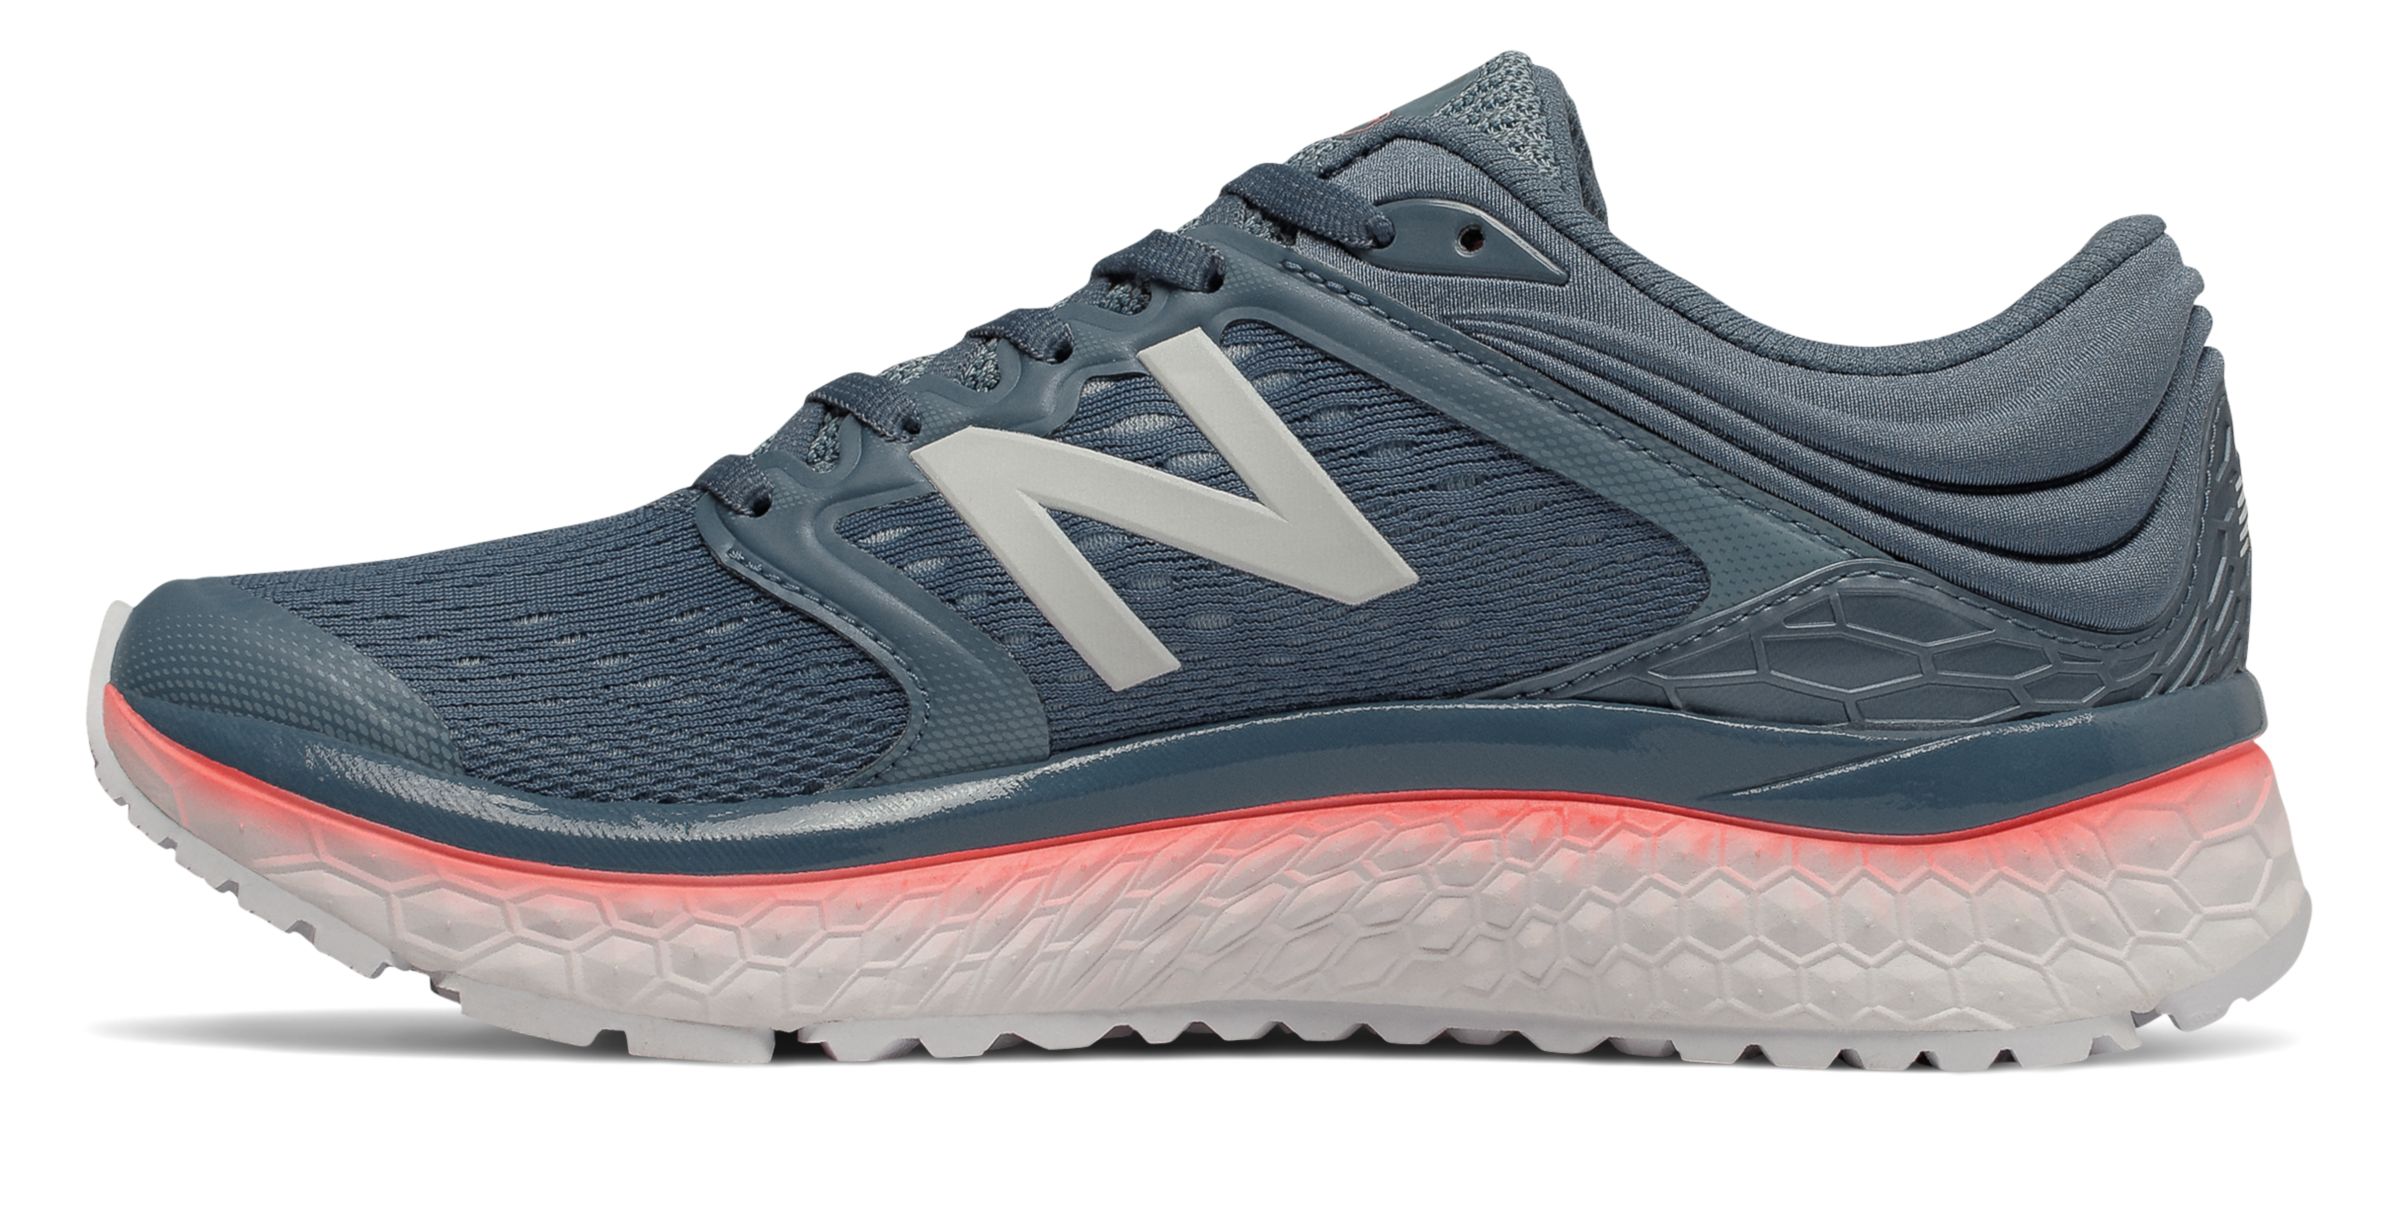 New Balance W1080-V8 on Sale - Discounts Up to 53% Off on W1080PD8 at Joe's  New Balance Outlet